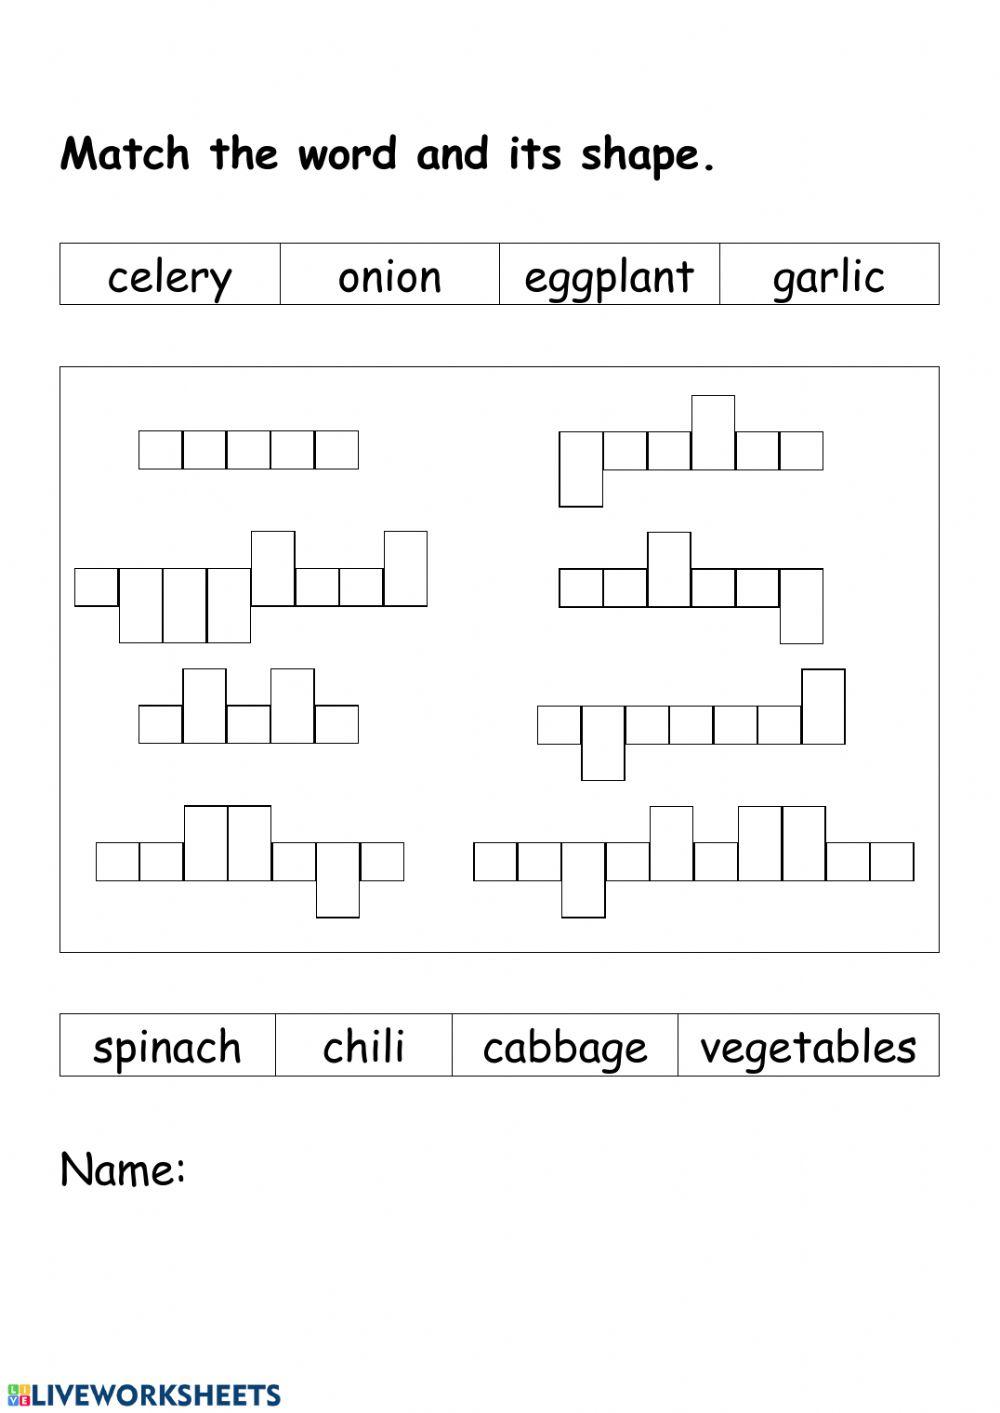 Vegetable Word Shapes